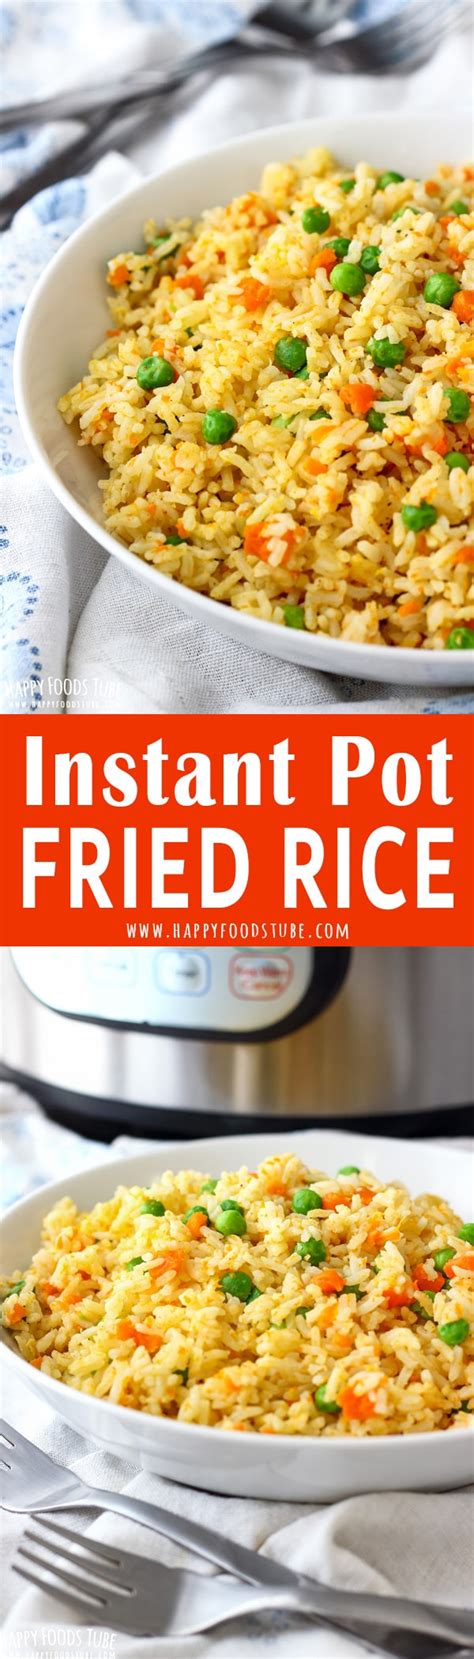 Get full ingredients list and instructions from the recipe card below. Instant Pot Fried Rice - Pressure Cooker Fried Rice